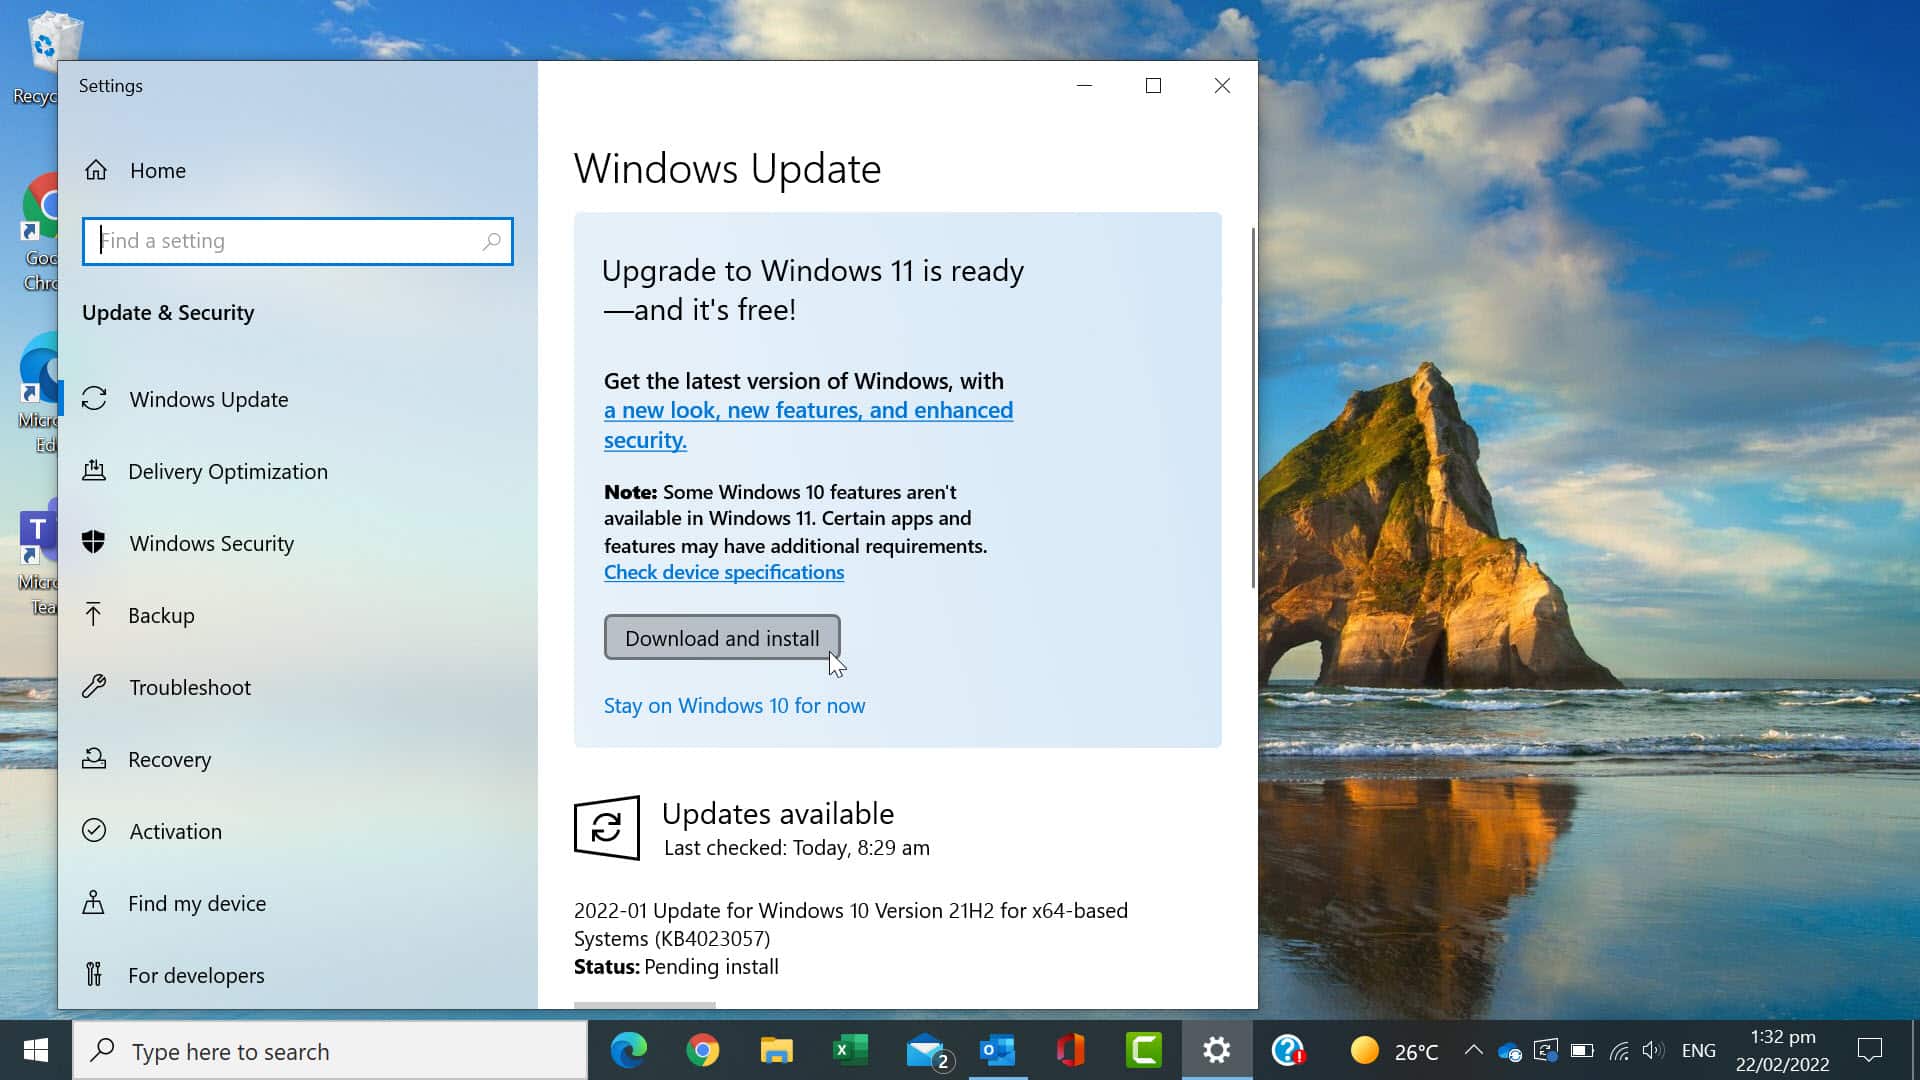 In the Update & Security are with a message saying "Upgrade to Windows 11 is ready - and its free!". The mouse is pointing towards the Download and install button 